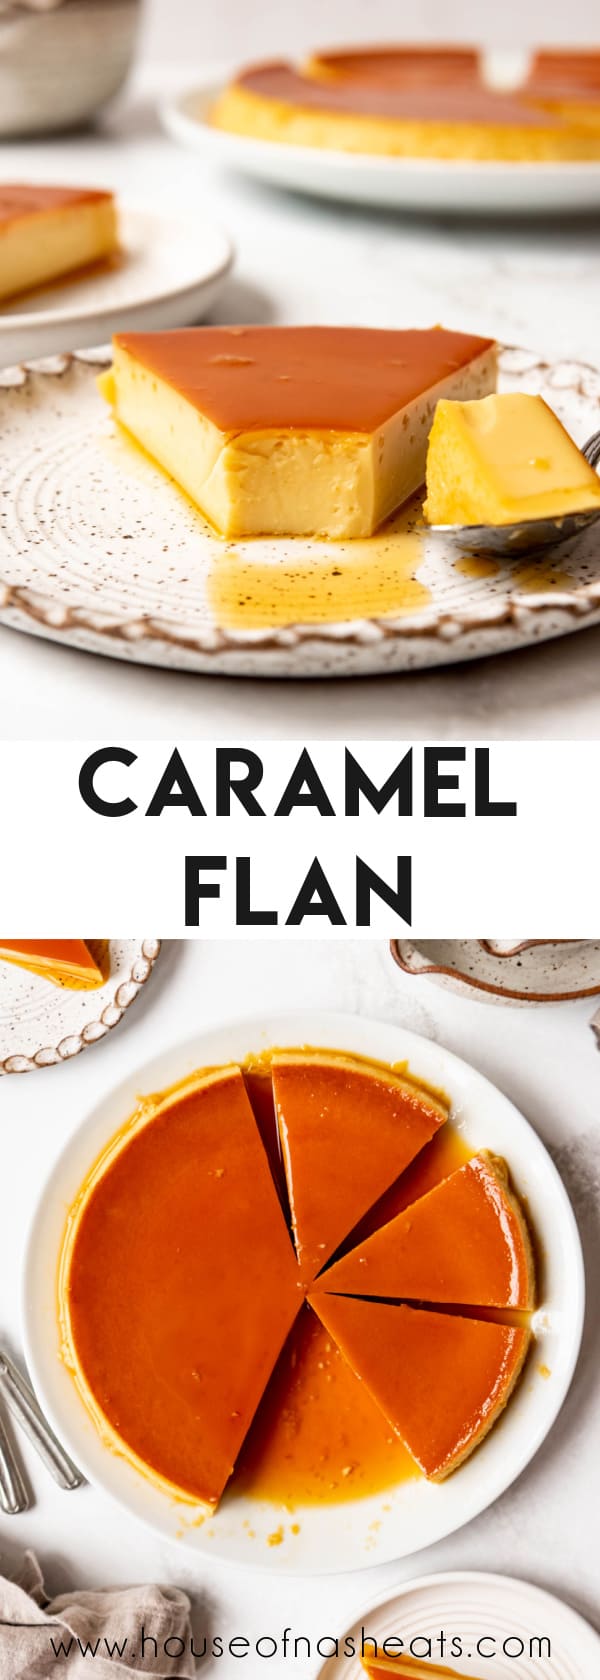 A collage of images of Mexican flan with text overlay.